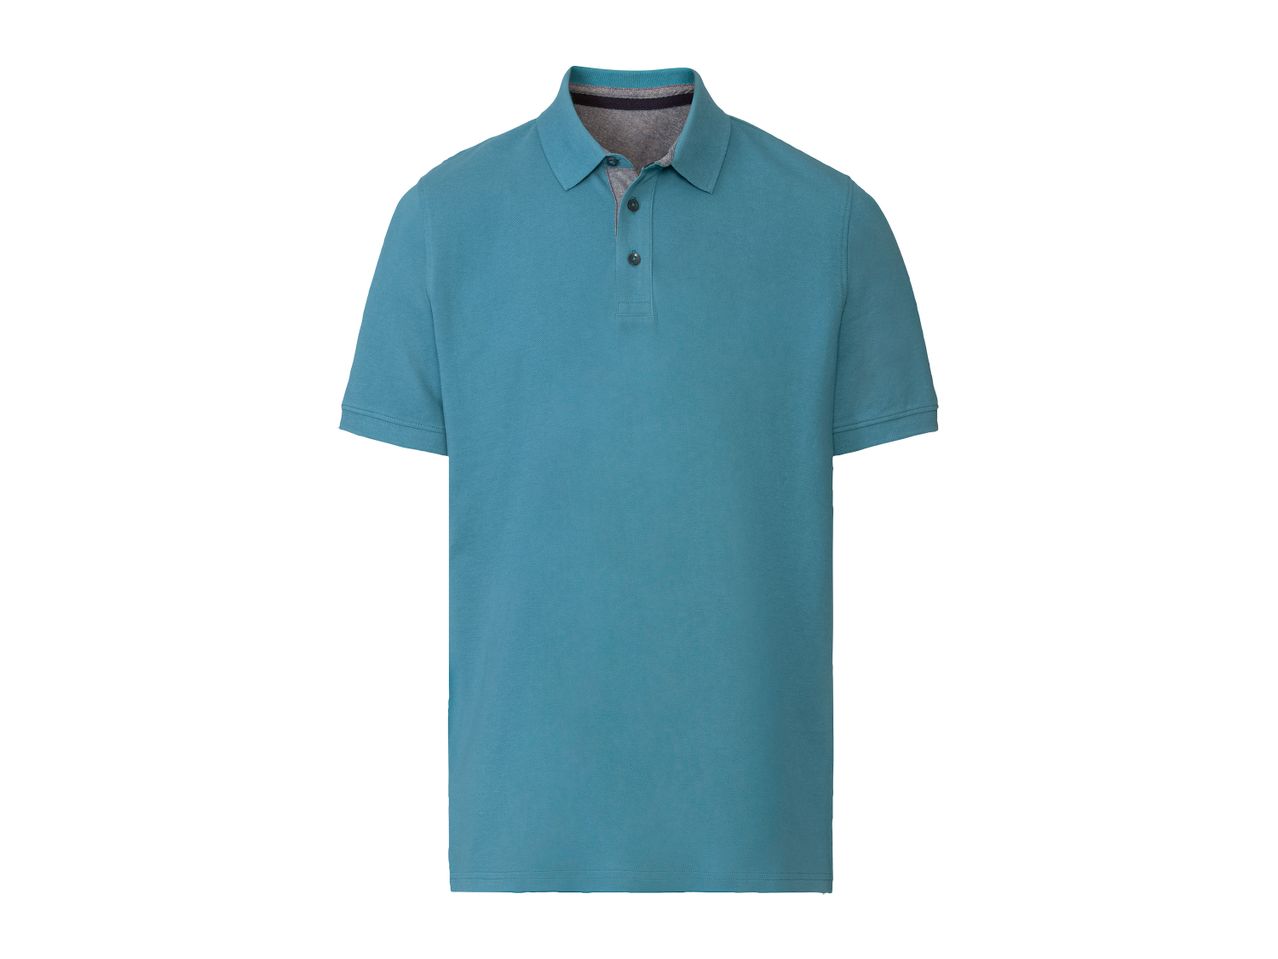 Go to full screen view: Men’s Polo Shirt - Image 9